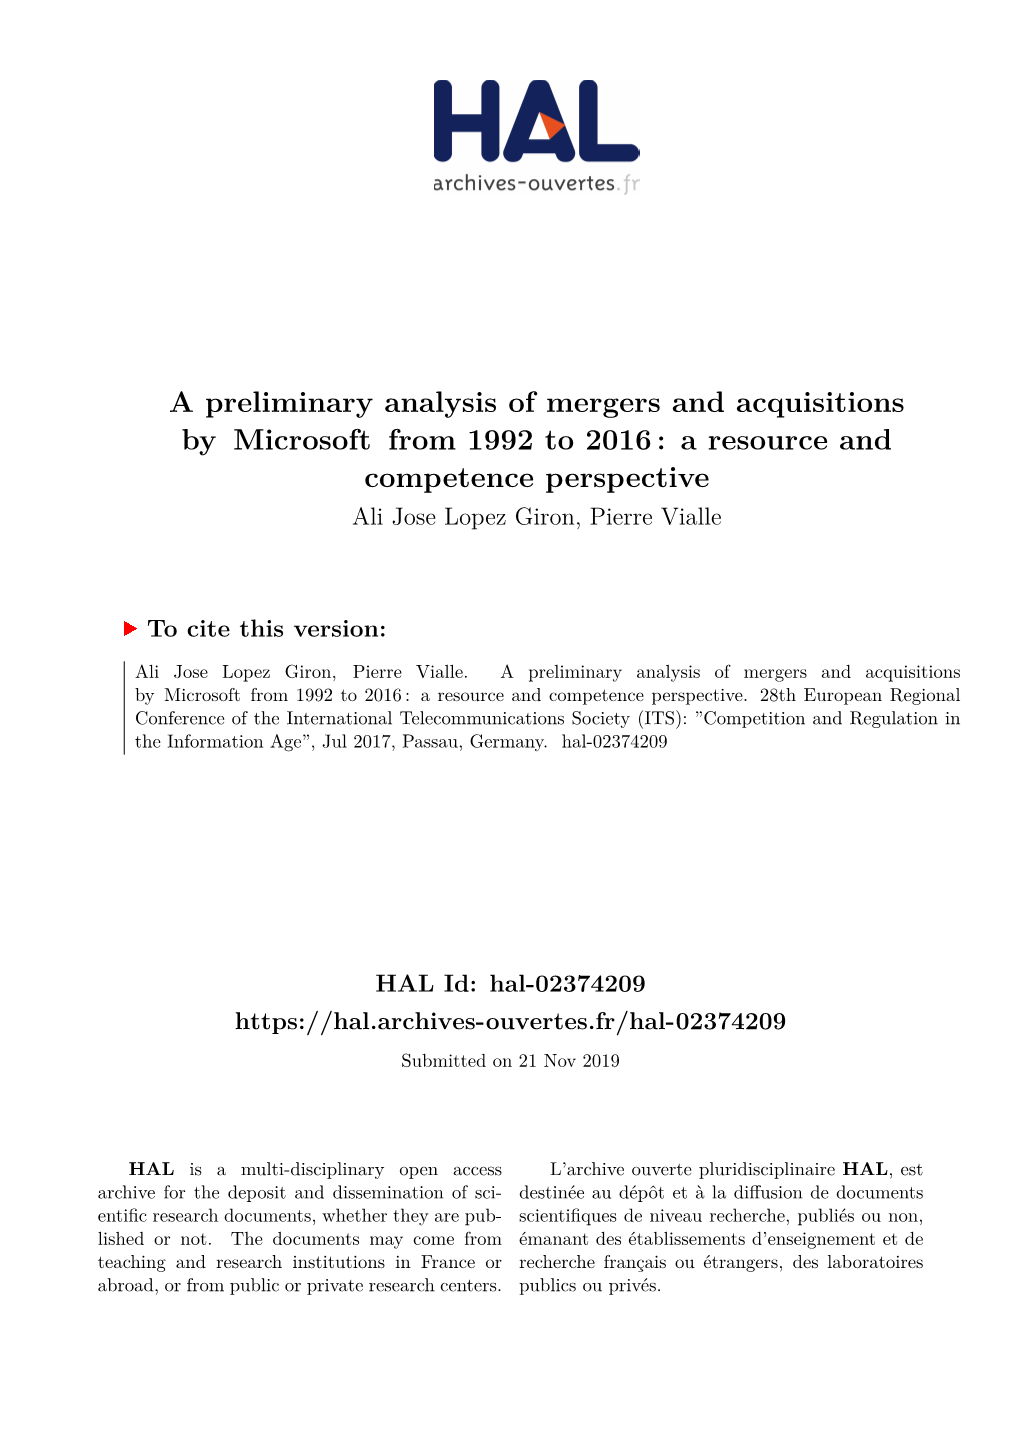 A Preliminary Analysis of Mergers and Acquisitions by Microsoft from 1992 to 2016 : a Resource and Competence Perspective Ali Jose Lopez Giron, Pierre Vialle